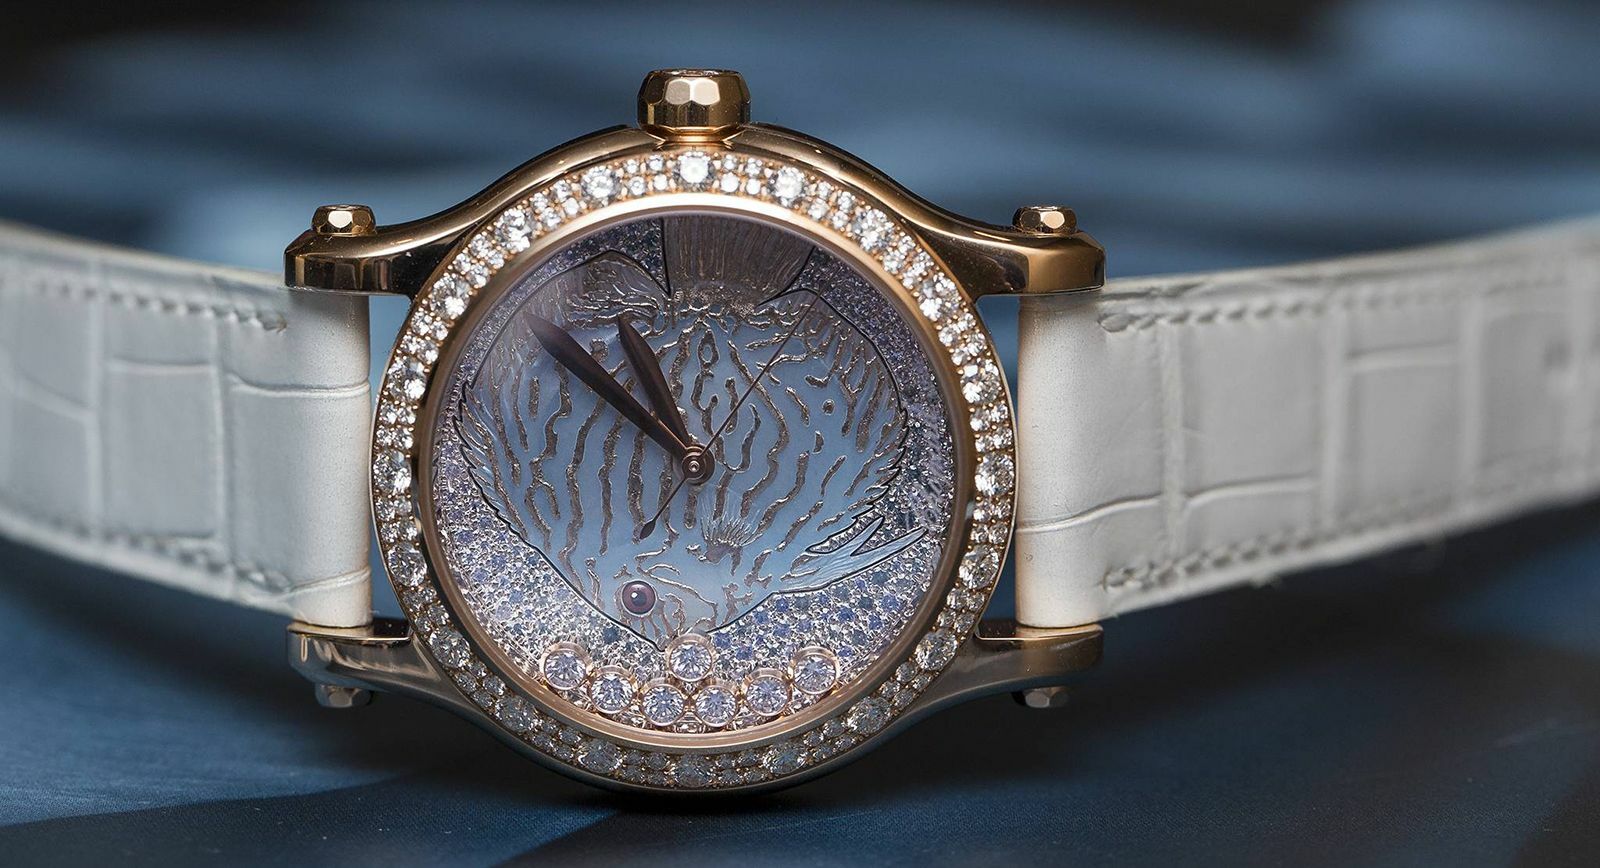 Baselworld Hot Trend: Bejewelled Sea Creatures